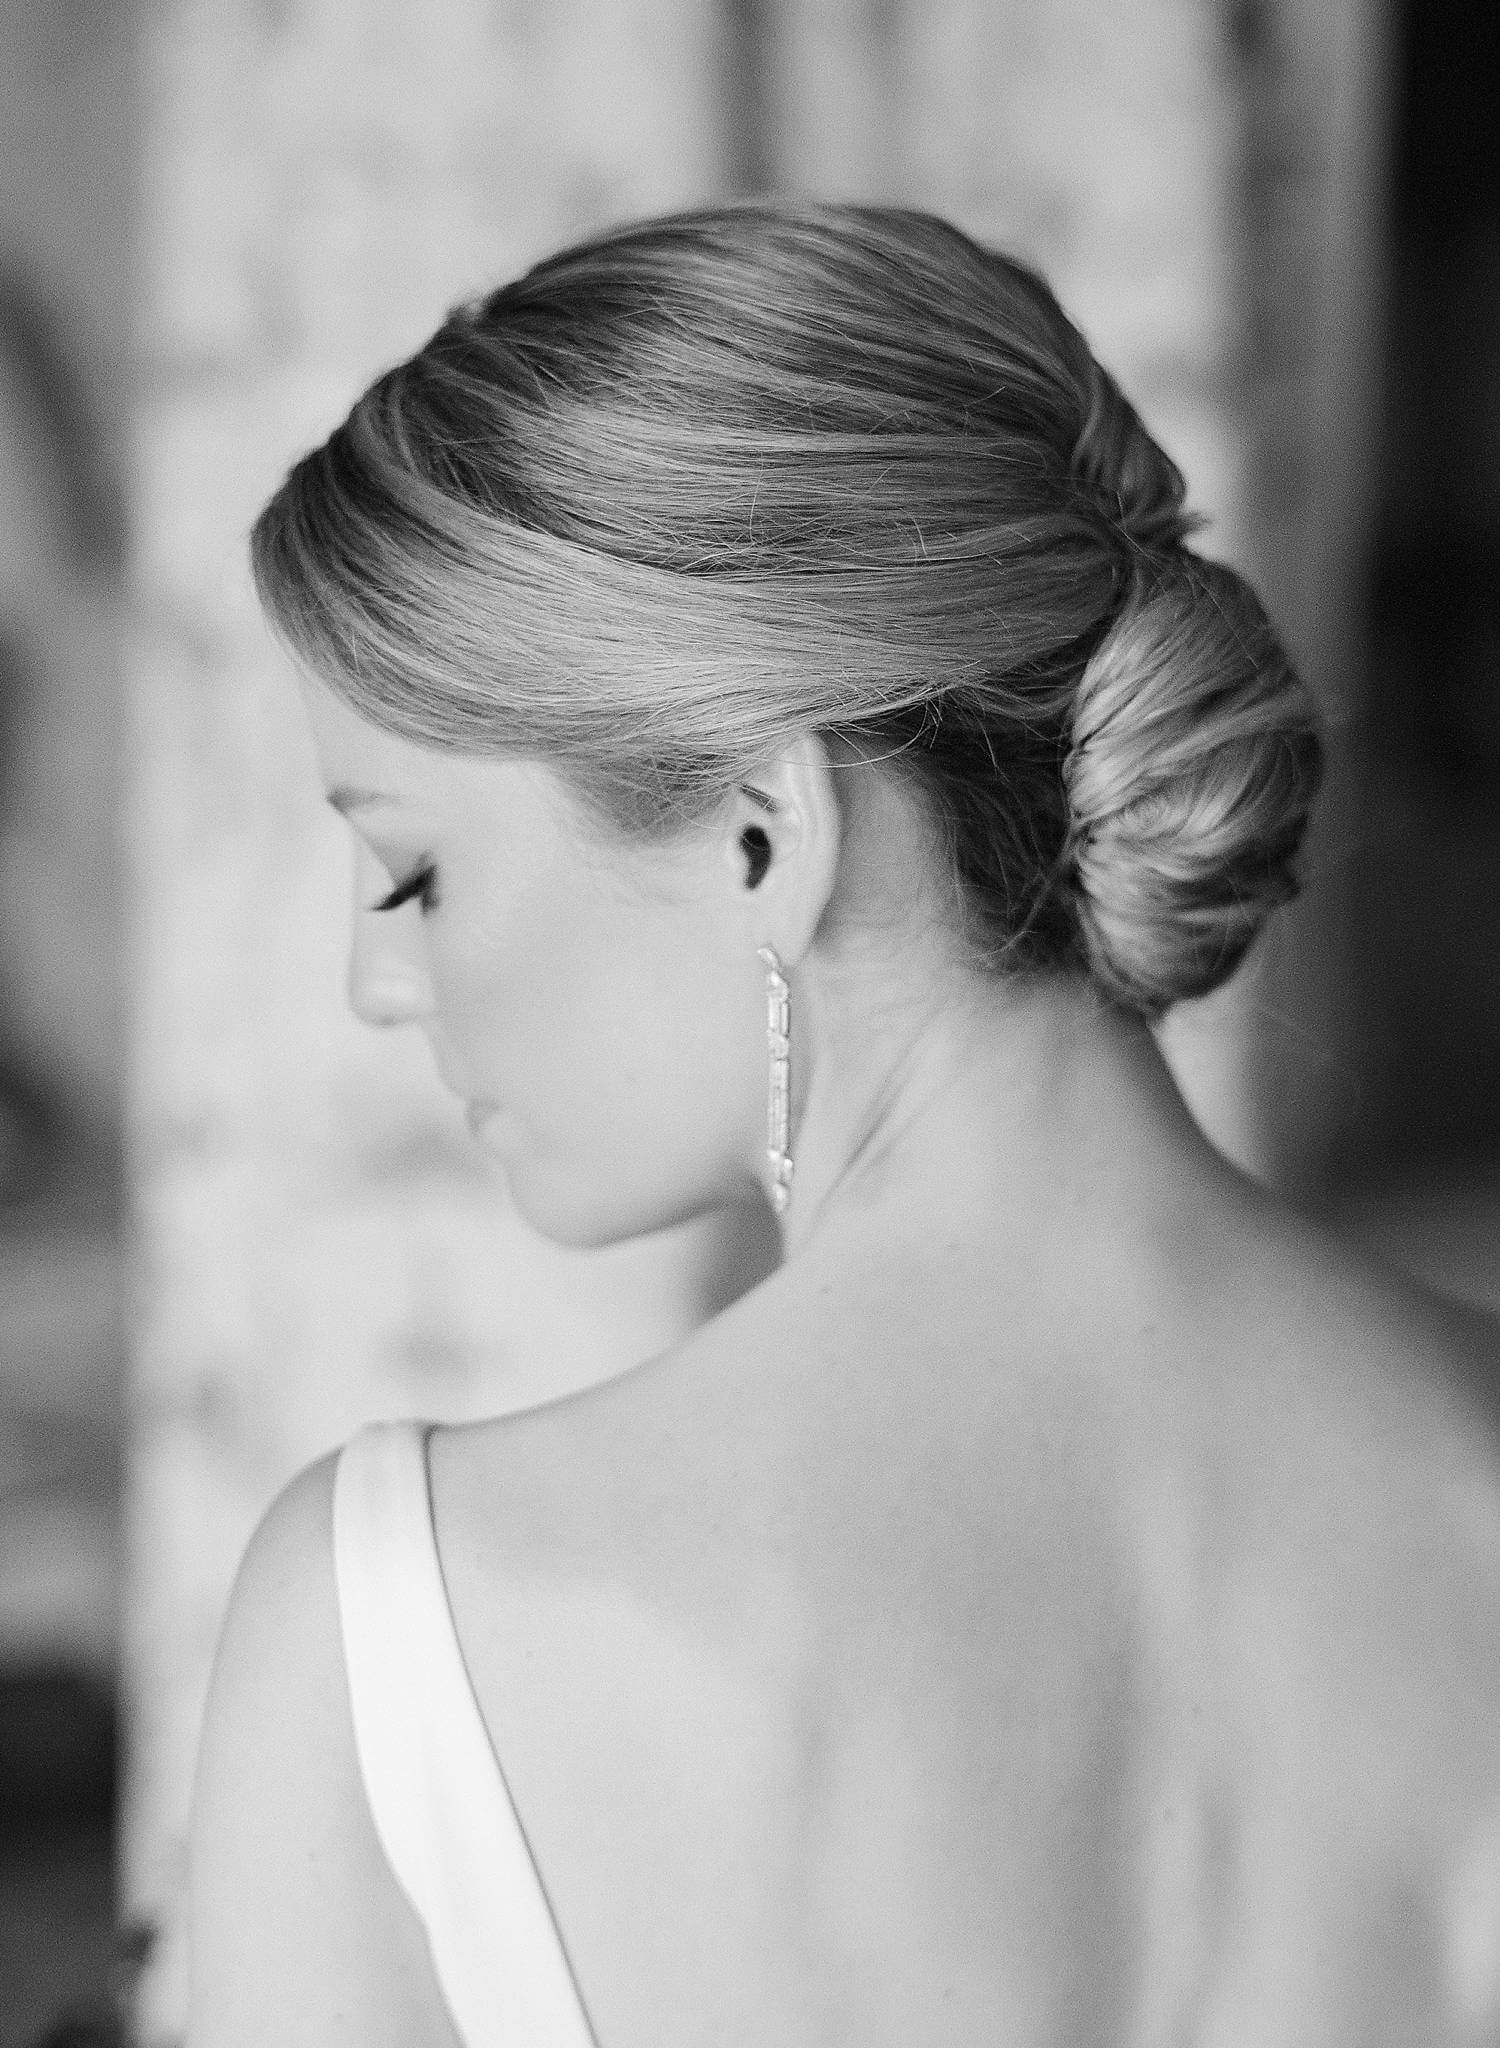 Detail image of bride's up-do.